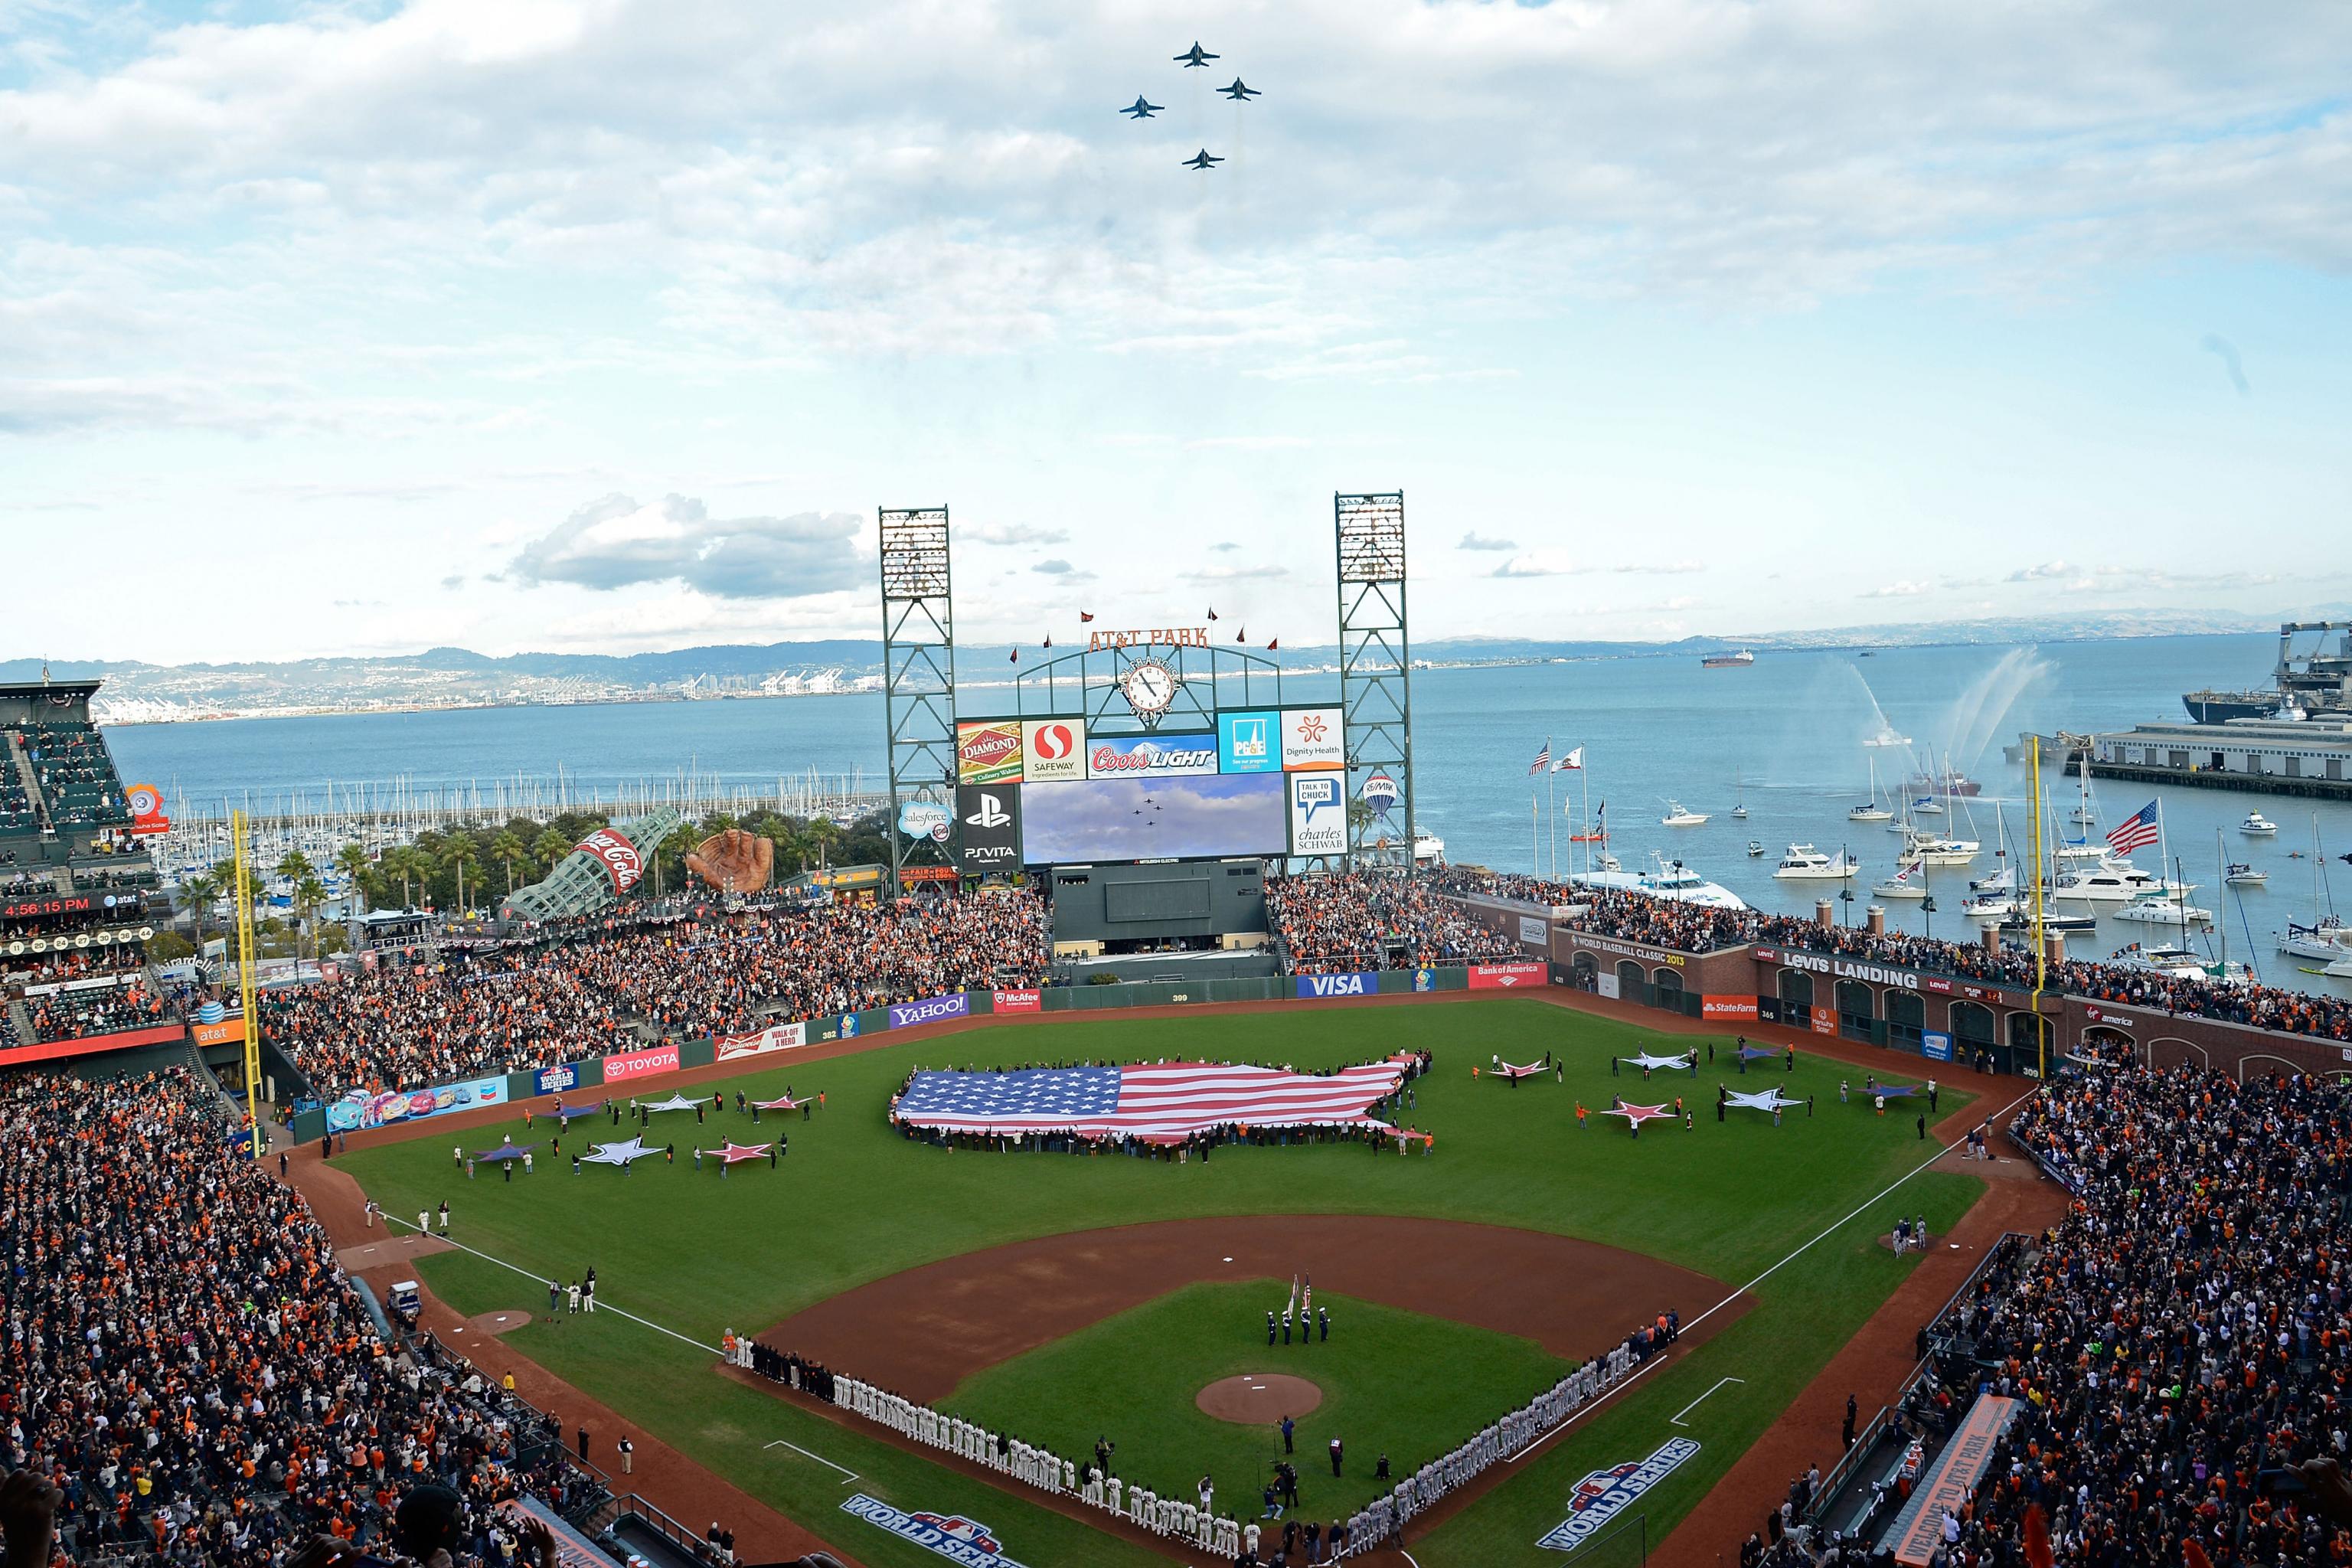 SF Giants or Oakland A's? I went to both Bay Area ballparks to see which  experience is more fun.